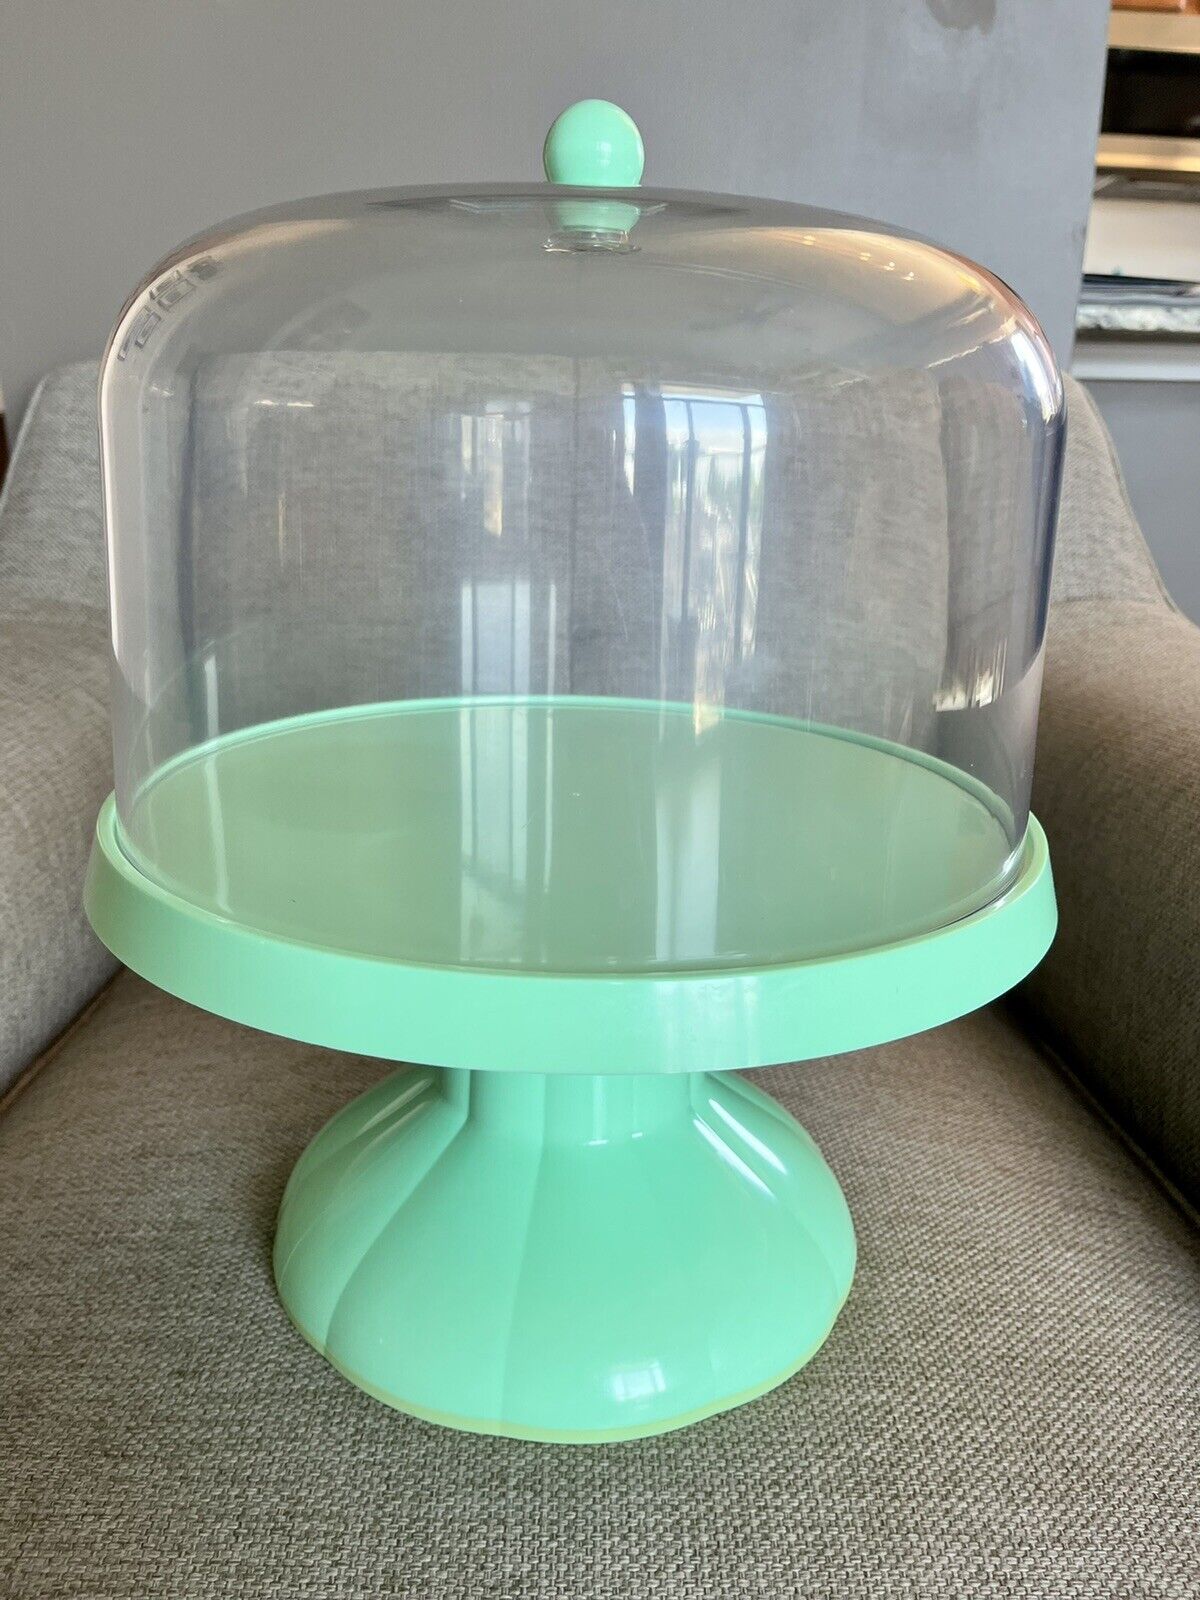 Wilton 12" Acrylic Jade Green Cake Turntable Rotating Cake Stand With Dome